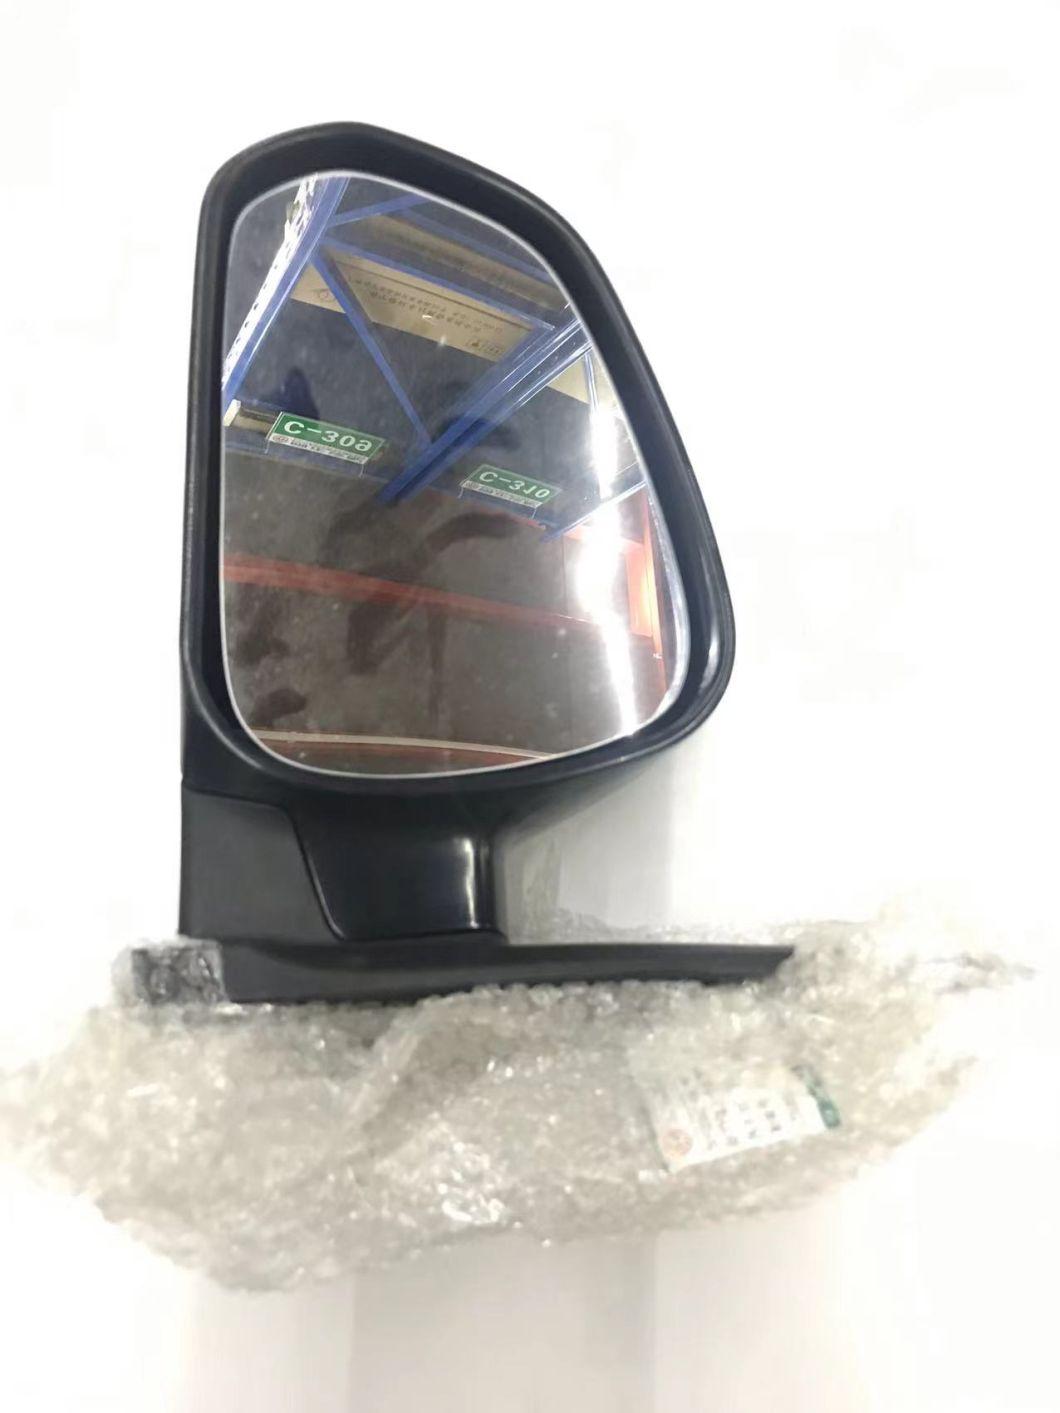 Best Selling Car Auto Parts Rear Mirror Left for Dongfeng Glory 330 (8202100-FA01-BK01)